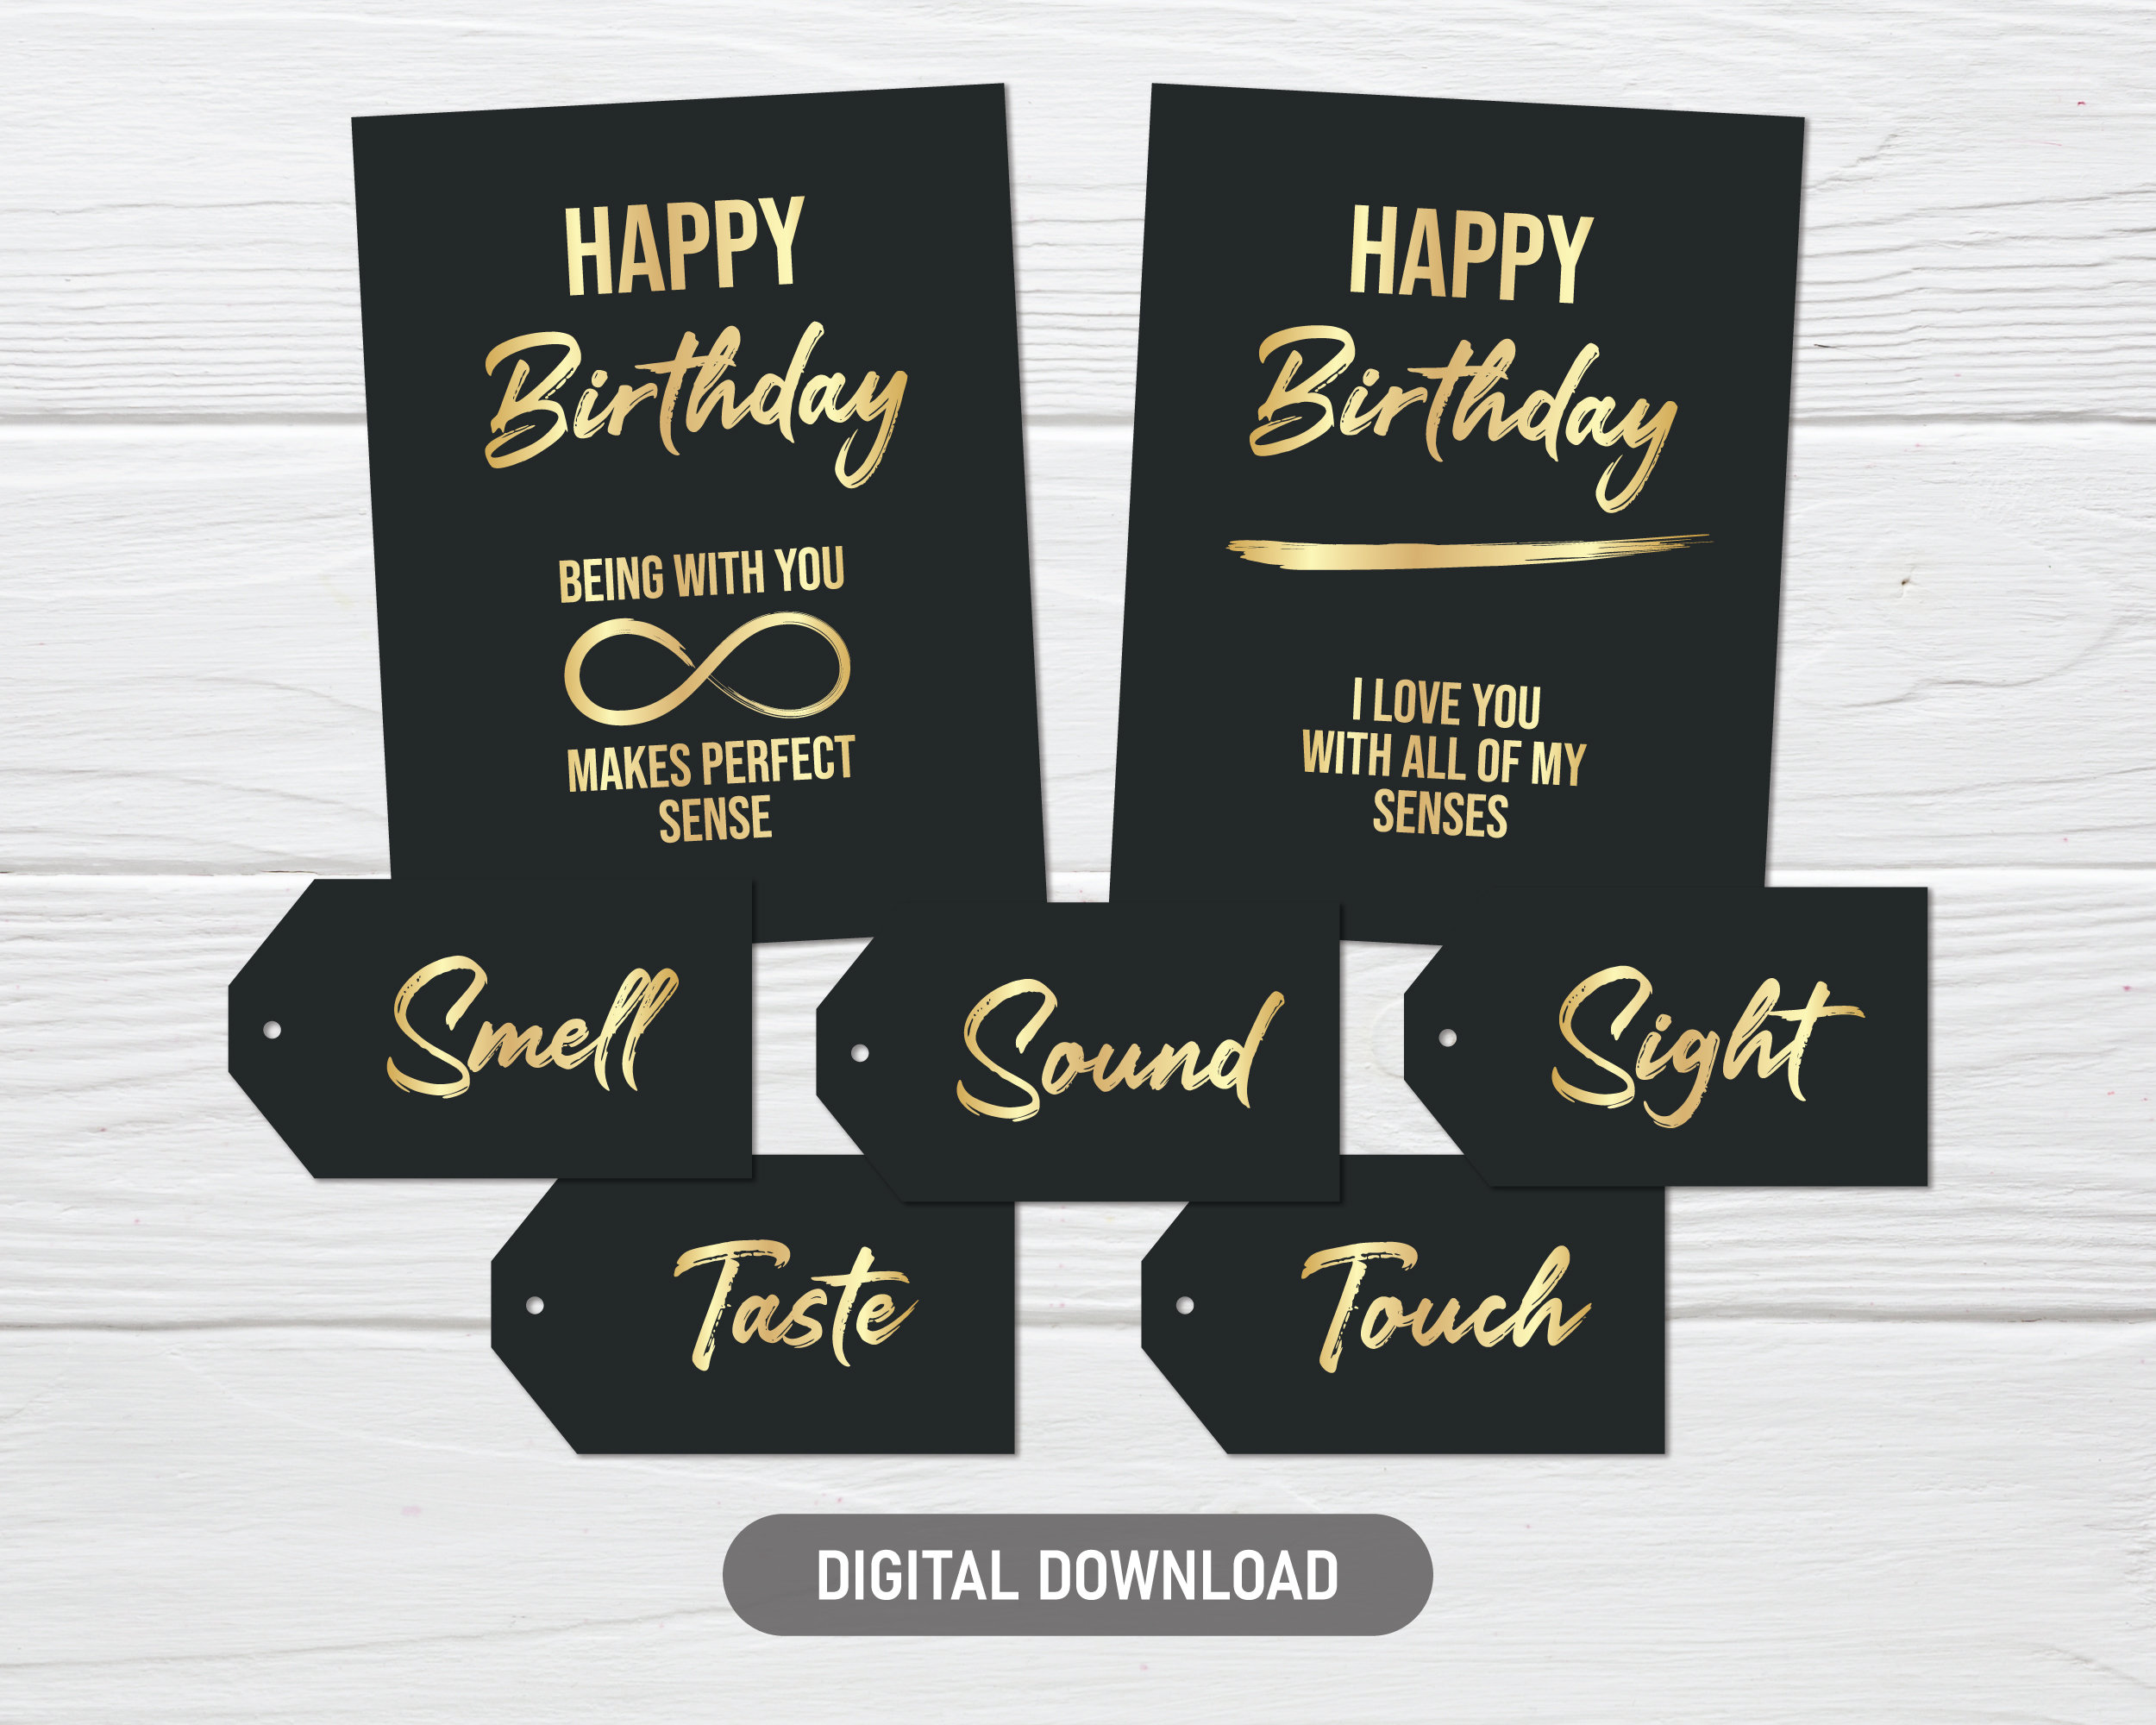 I love you with all of my senses, my version for my boyfriends birthday   Diy birthday gifts, Easy birthday gifts, Birthday gifts for boyfriend diy